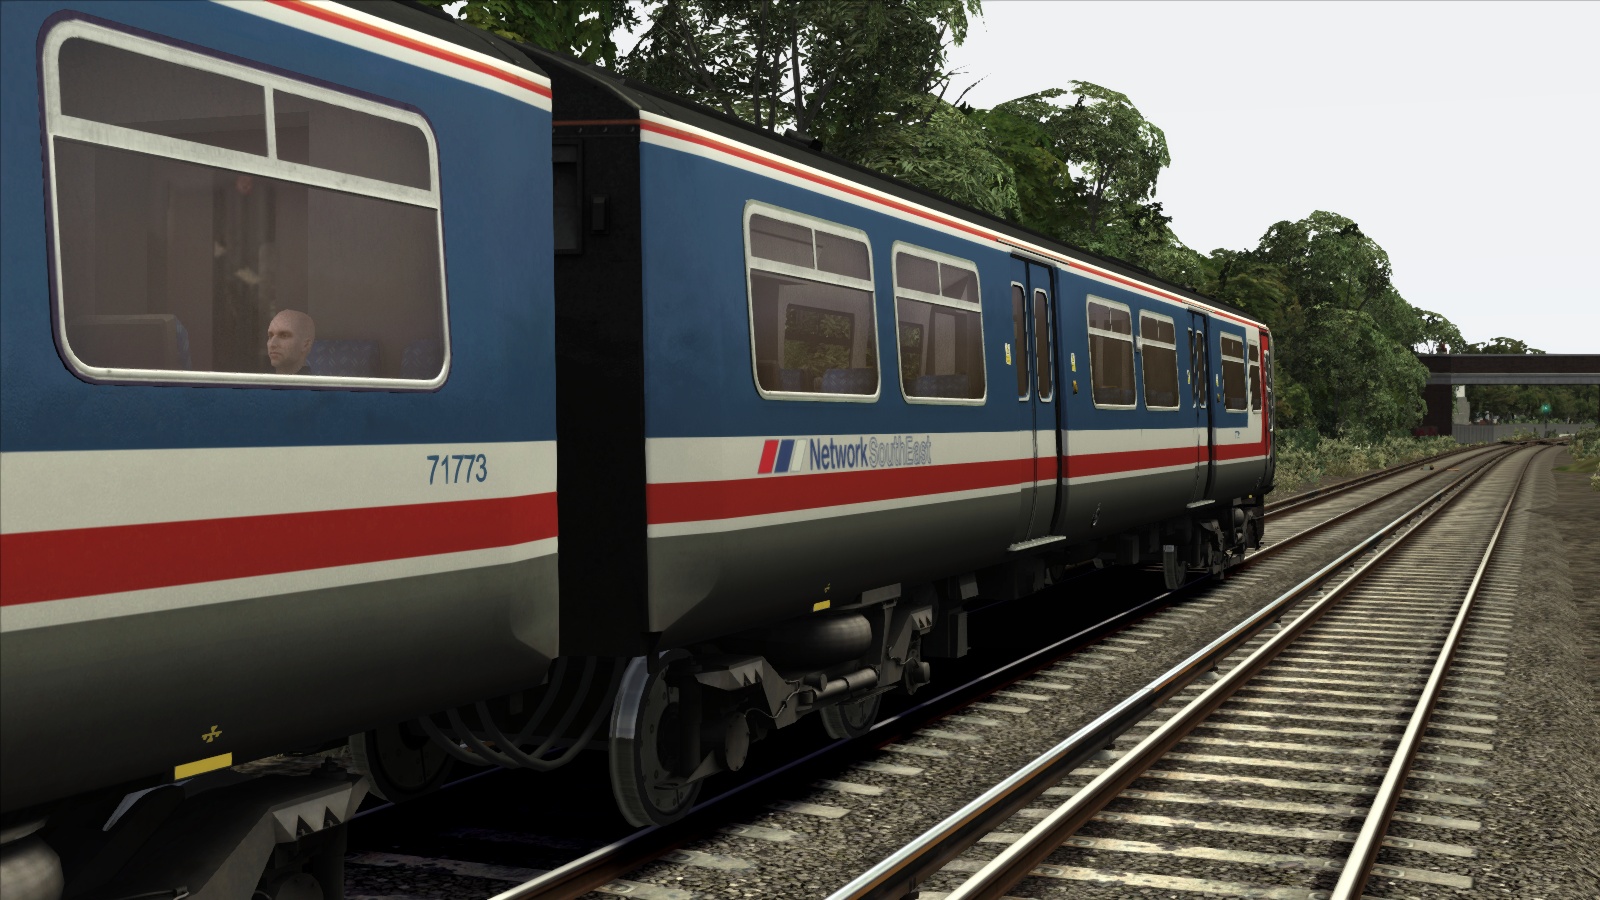 Network South East Class 319 Add-on Livery screenshot